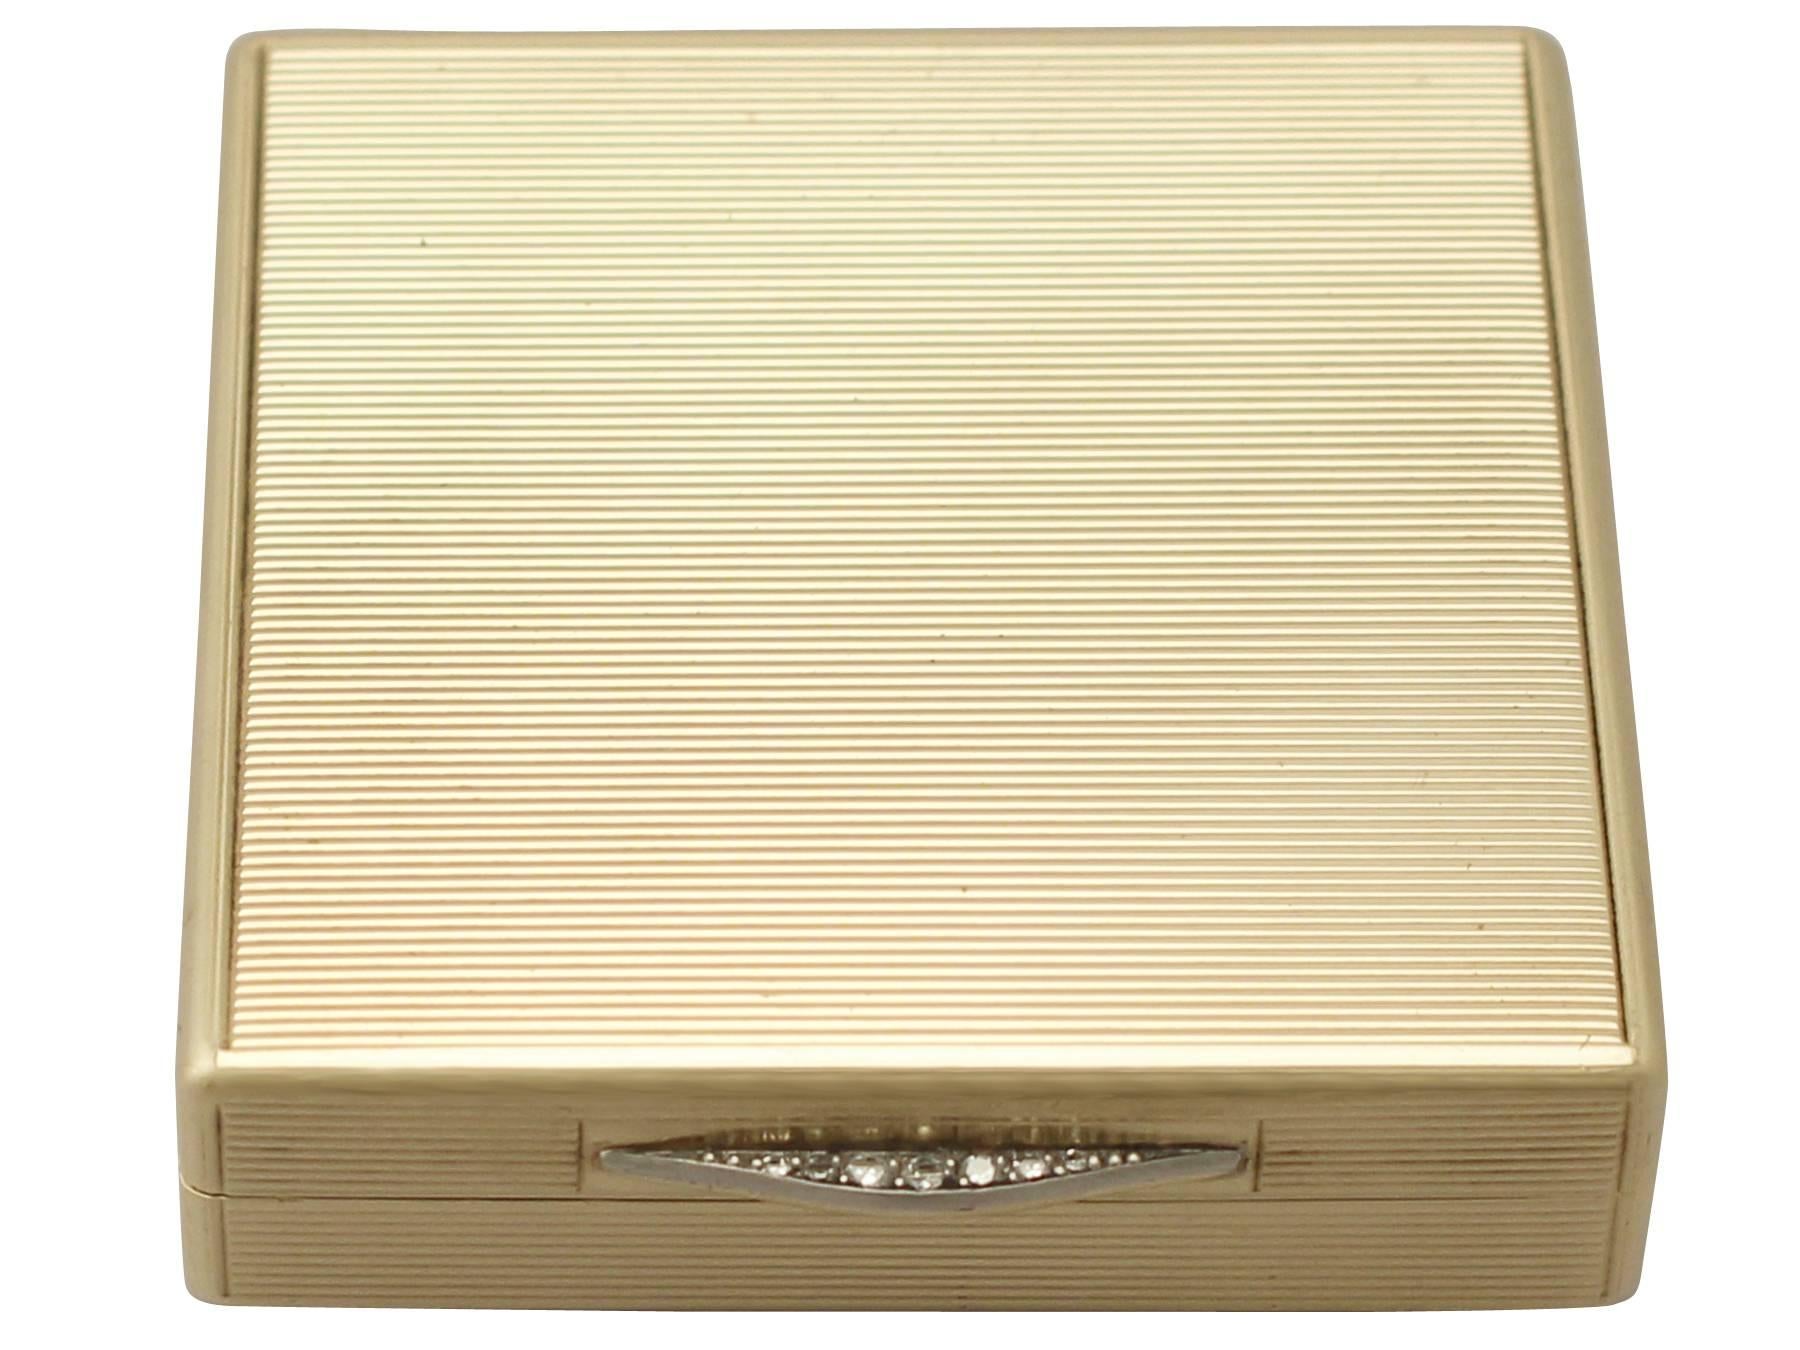 An exceptional, fine and impressive antique Edward VIII English 9-karat yellow gold compact made by Cartier - boxed; an addition to our ornamental silverware collection.

This exceptional antique Edward VIII 9-karat yellow gold compact has a